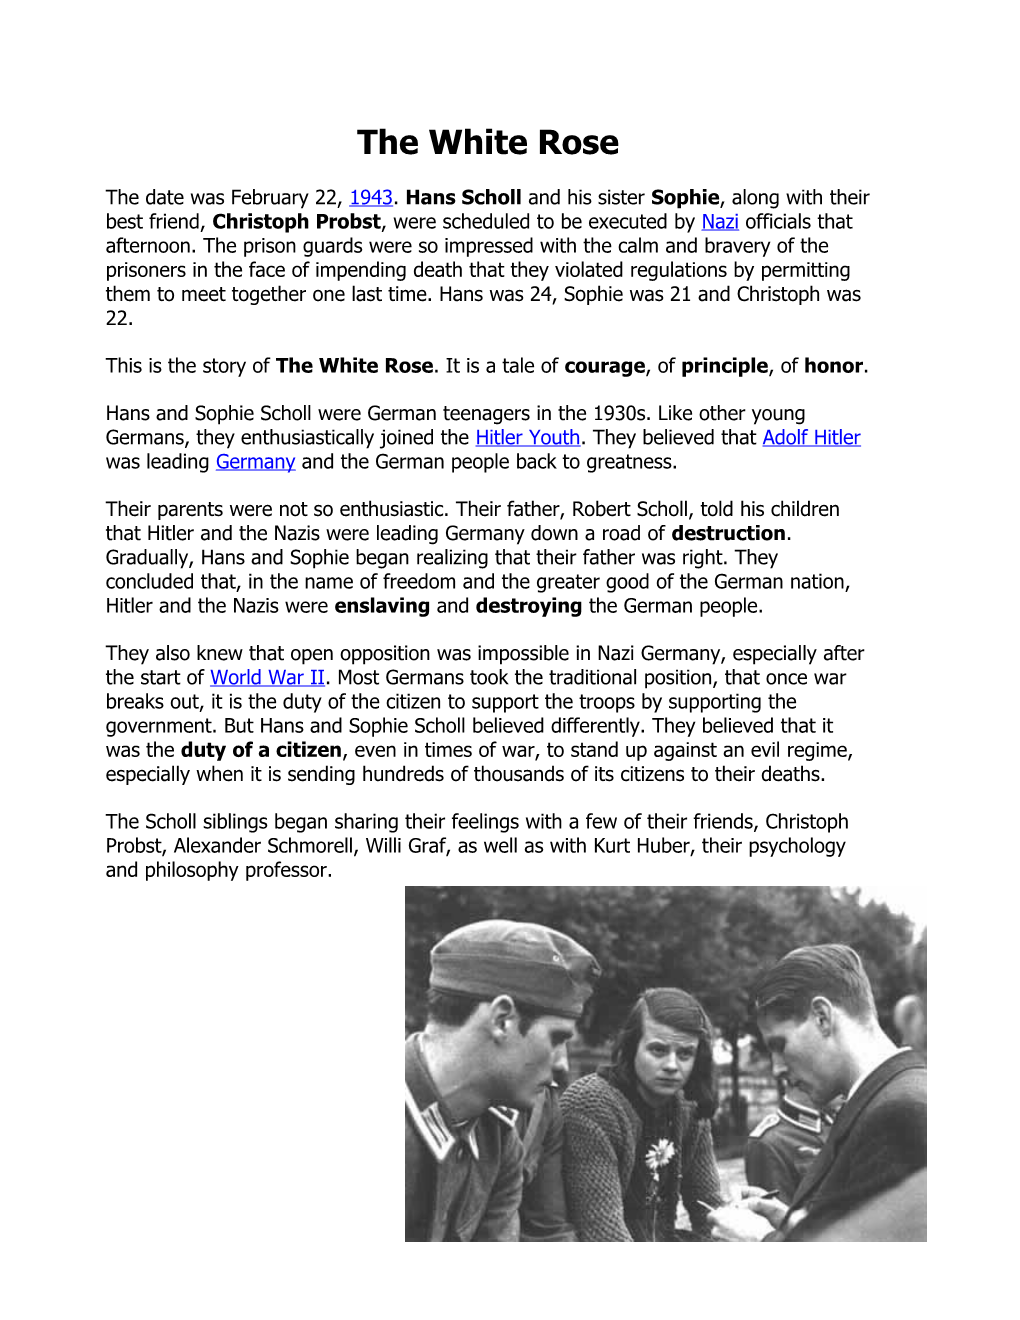 The White Rose: a Lesson in Dissent